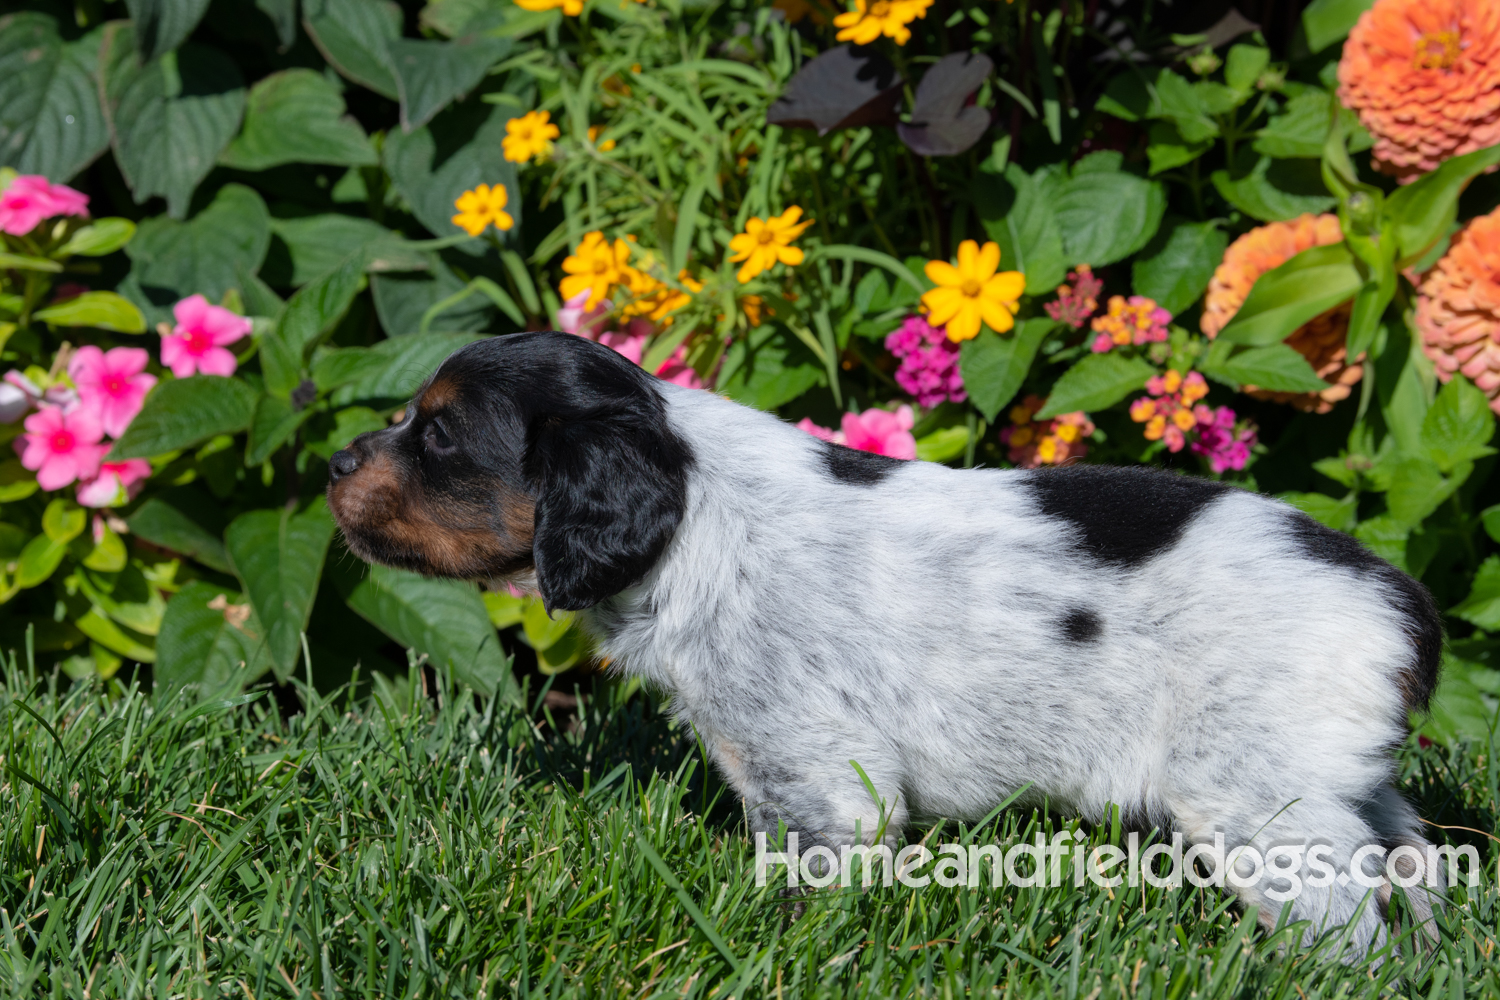 Pictures of adorable french brittany puppies in front of flowers.